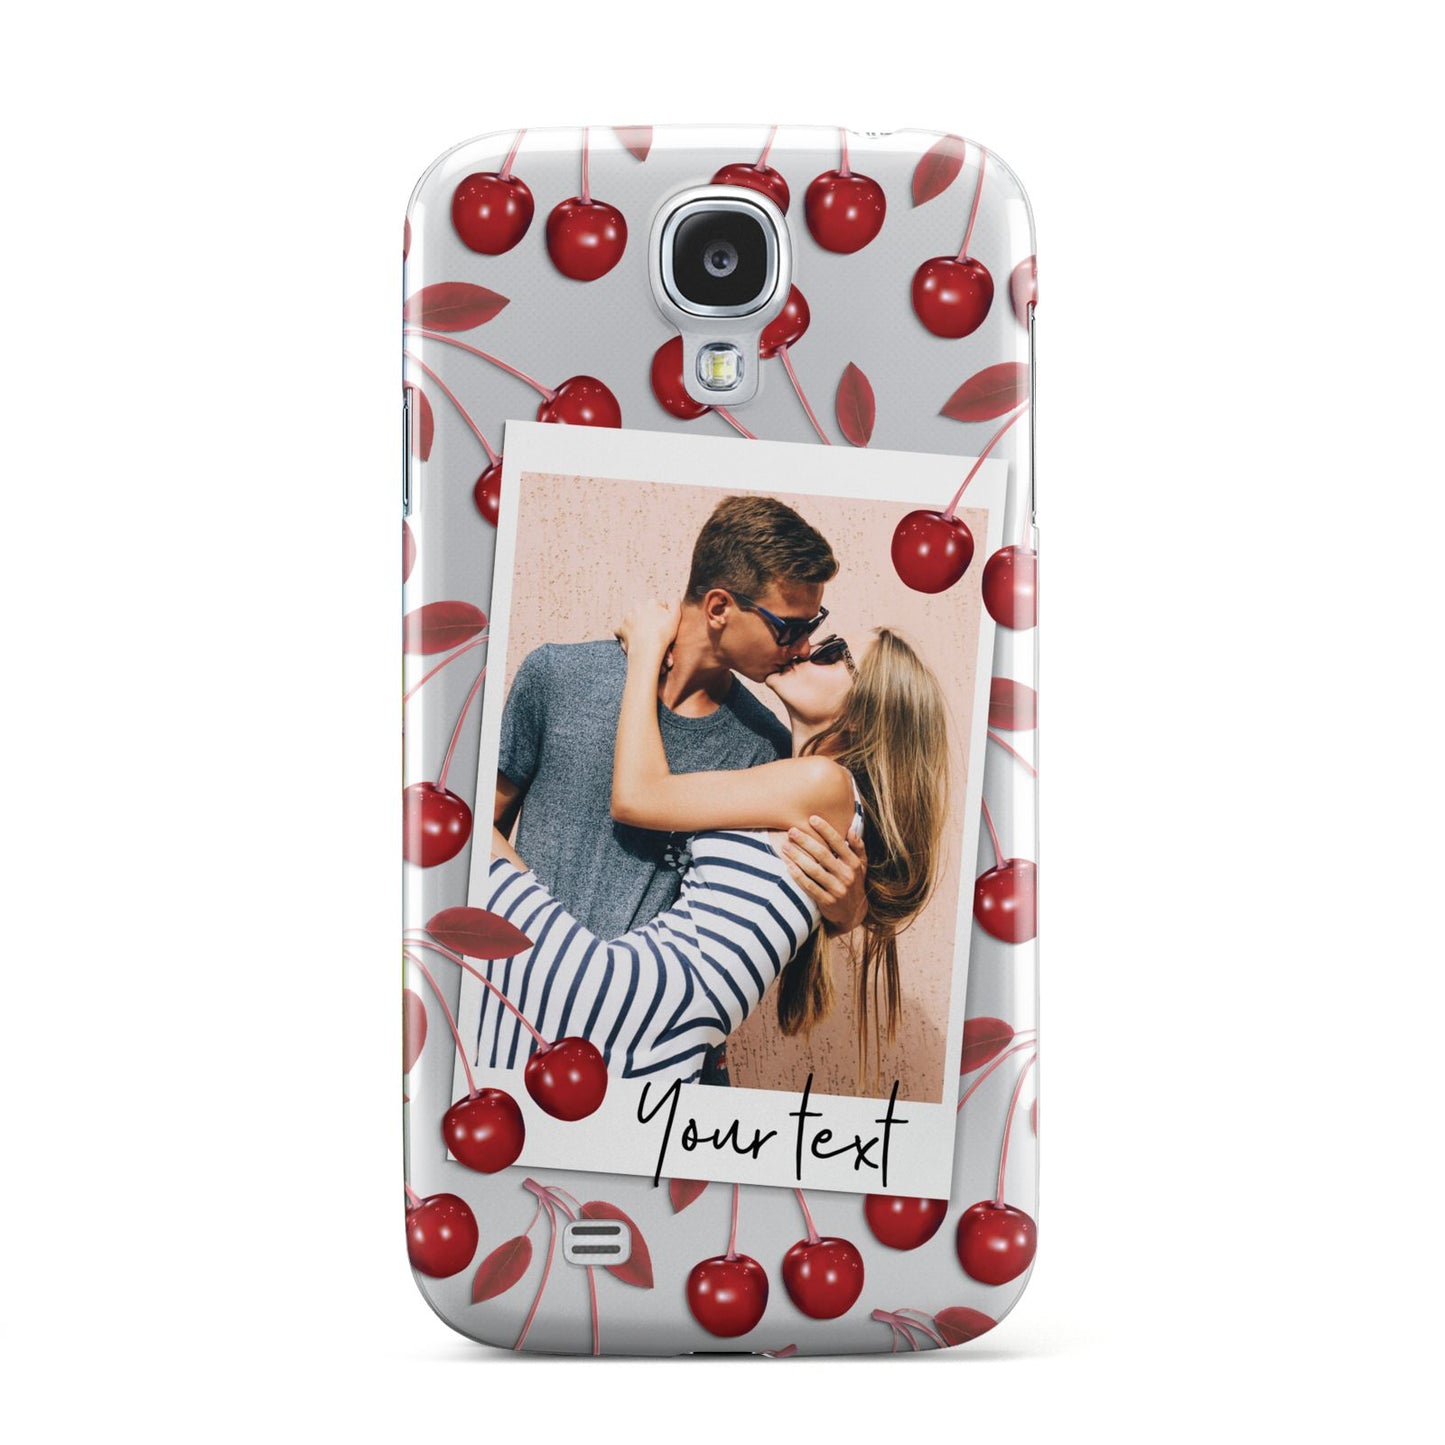 Personalised Photo Cherry Samsung Galaxy S4 Case